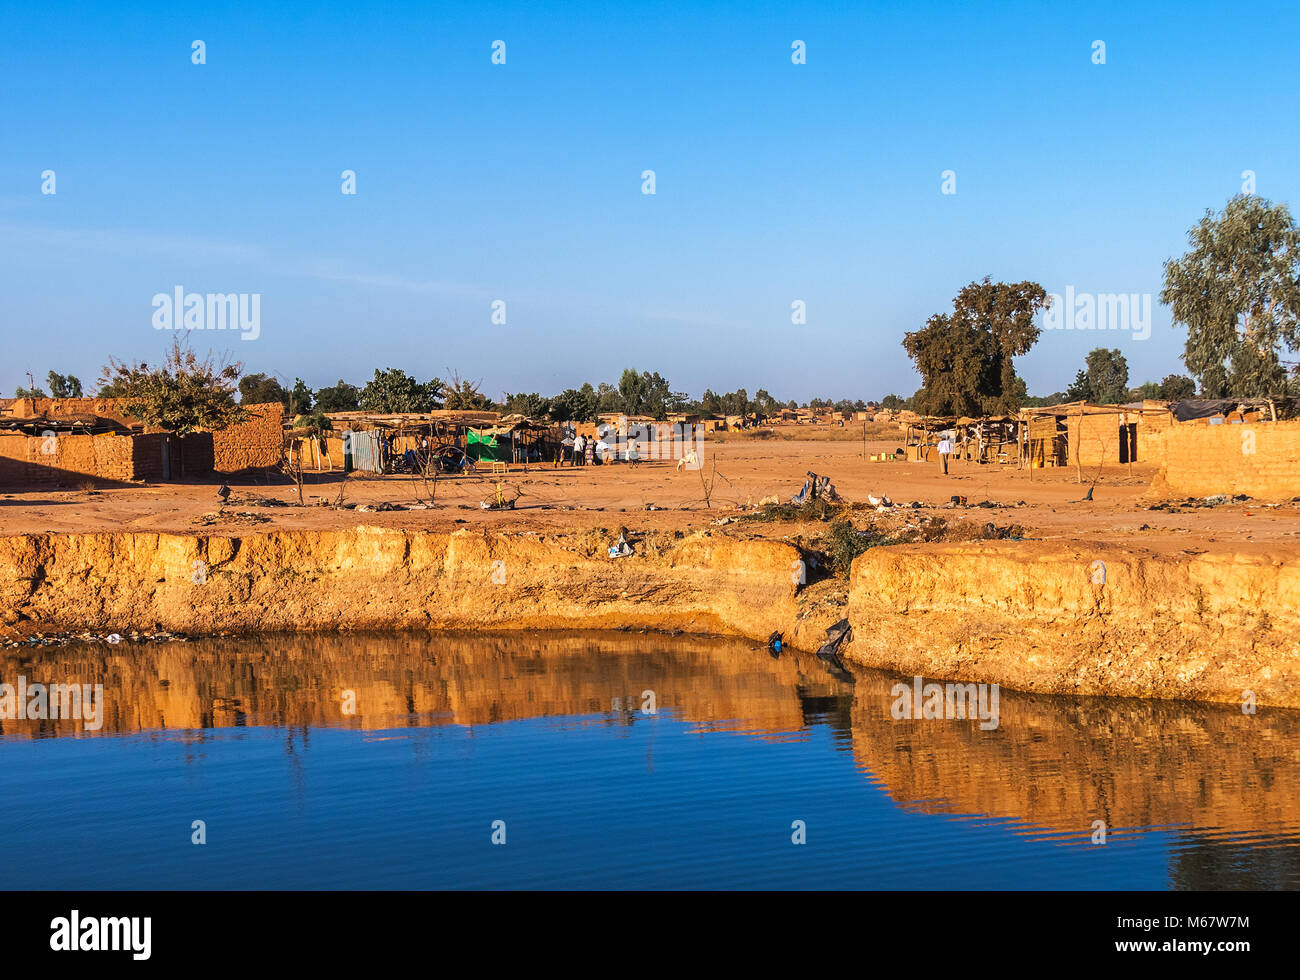 Eastern township of Ouagadougou on a sunny day with a hole filled with rainwater in the foreground, Burkina Faso. Stock Photo